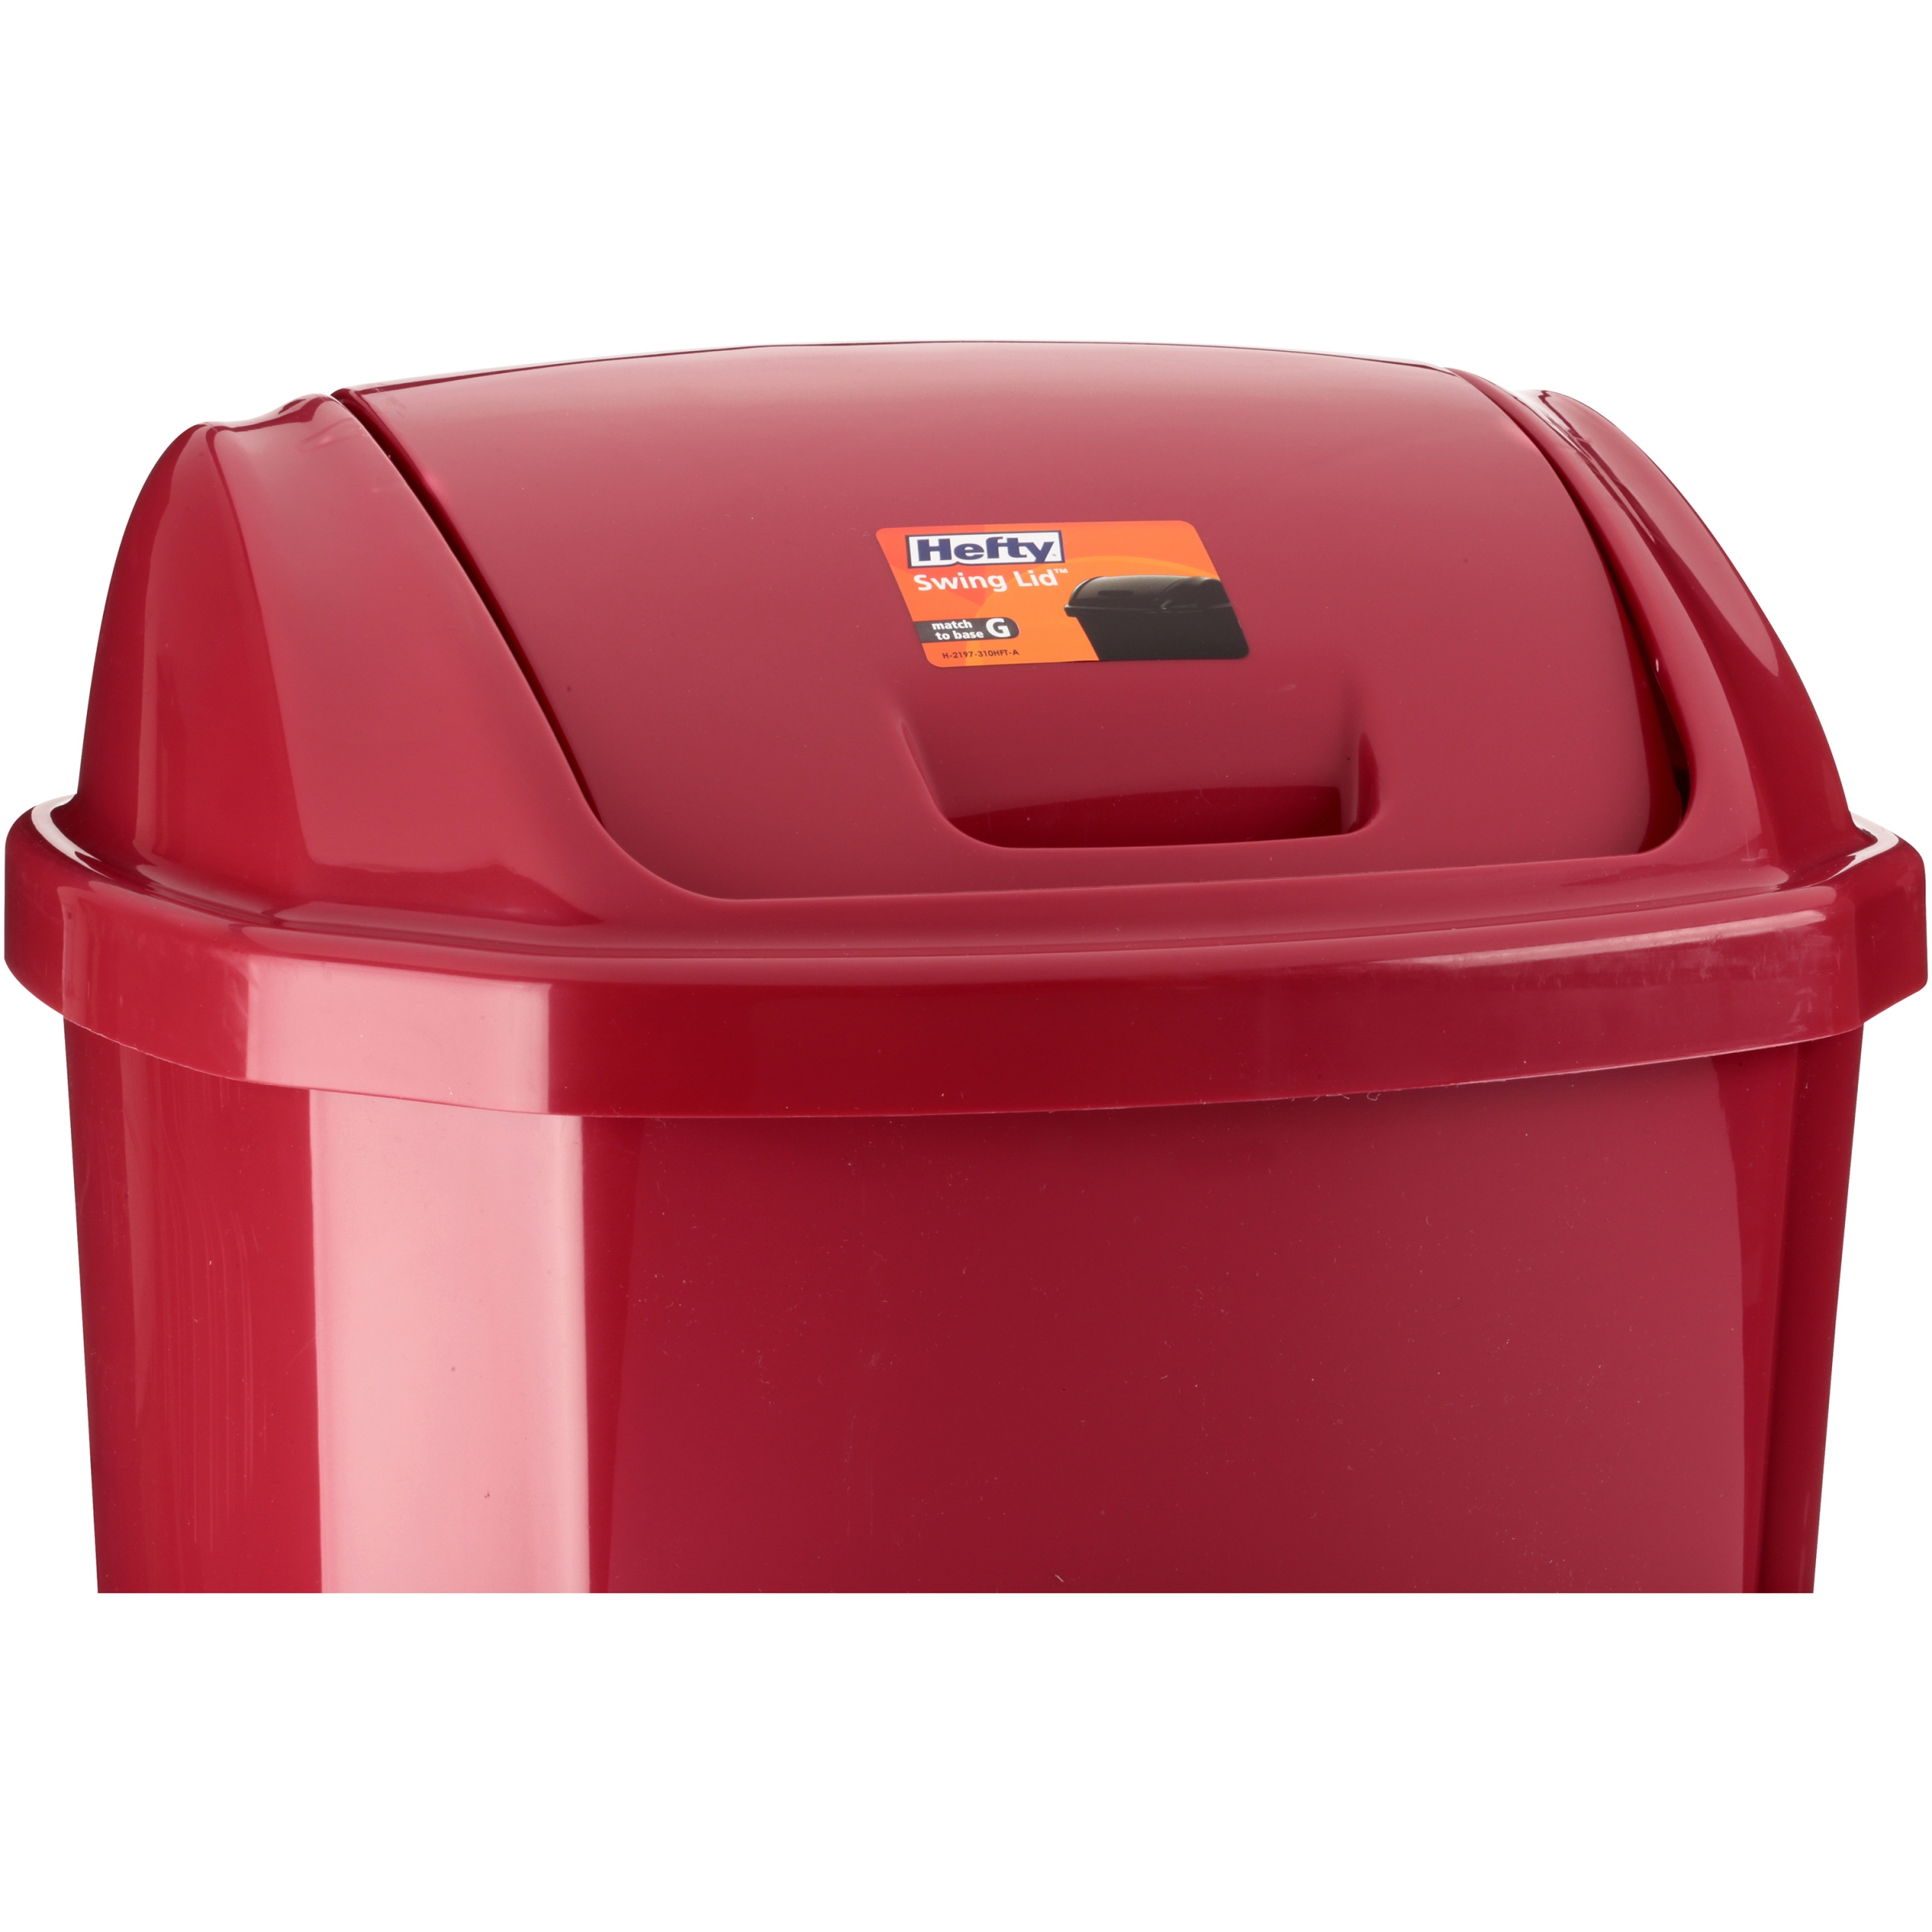 Hefty Swing-Lid 13.5-Gallon Trash Can, Multiple Colors - image 2 of 4